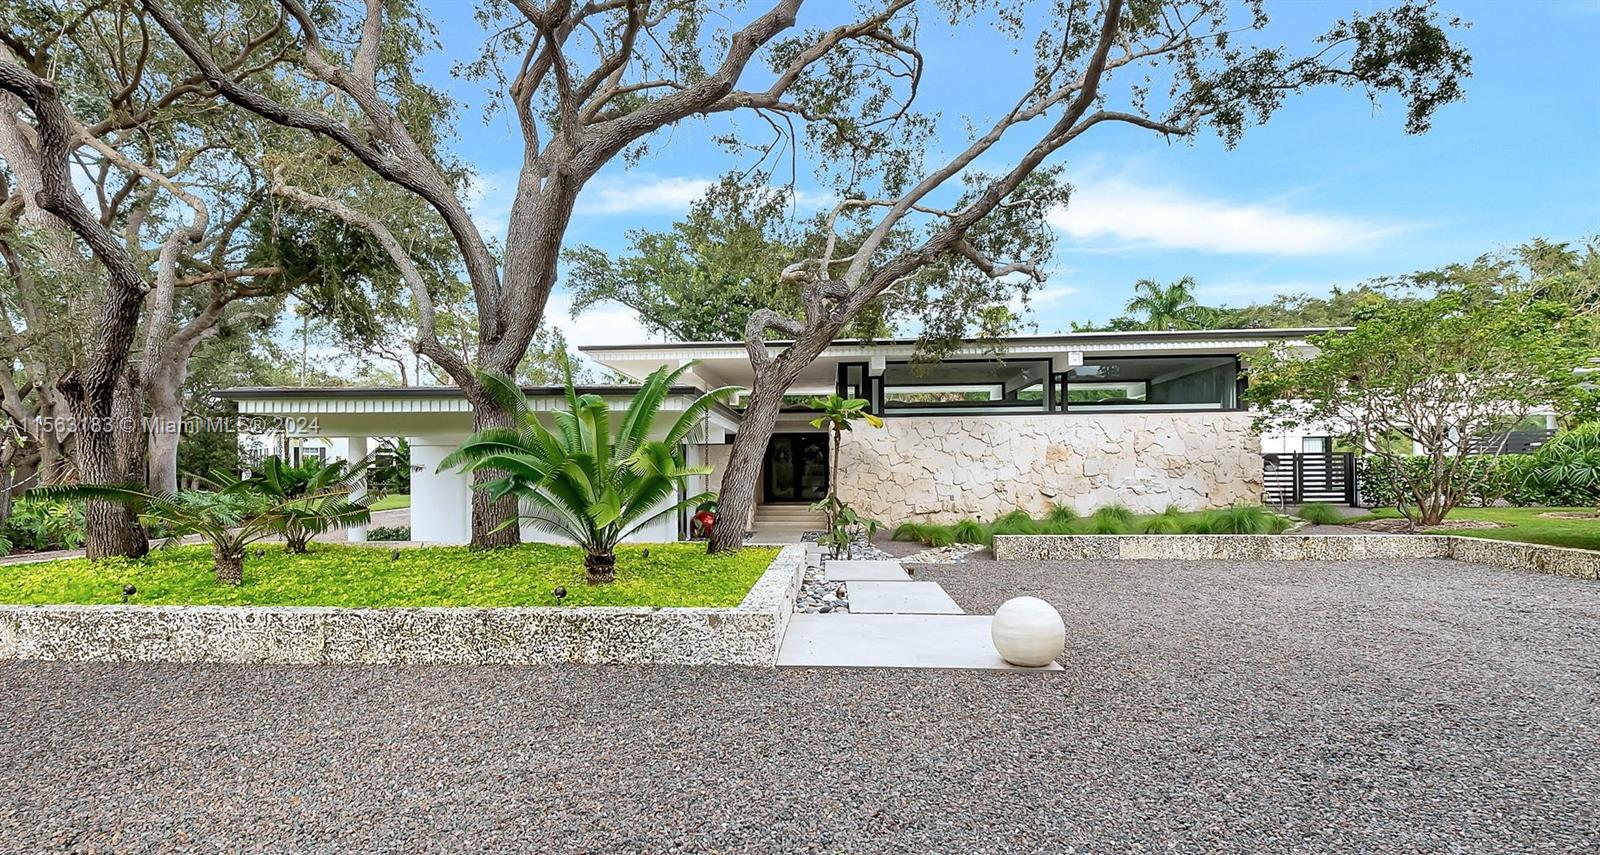 This Mid-century marvel by architect Robert B. Browne has been meticulously revitalized for modern living. Nestled in a prime Pinecrest location, this home boasts modern upgrades and robust construction, featuring a new roof, PVC plumbing, and floor to ceiling impact windows and doors. The main residence offers 5 bedrooms, 4 full baths, and 2 half baths. It showcases an Italian kitchen with sleek steel appliances and quartz countertops. This property includes a separate 831 sq ft independent 1 bed/1 bath guest house. The 37,592 sq. ft. corner lot is meticulously landscaped with oolite and gravel driveways, new pool, fire pit, and covered patio, ideal for outdoor entertaining. Complete with an oversized 4+ car A/C garage, this property marries vintage charm with modern luxury.